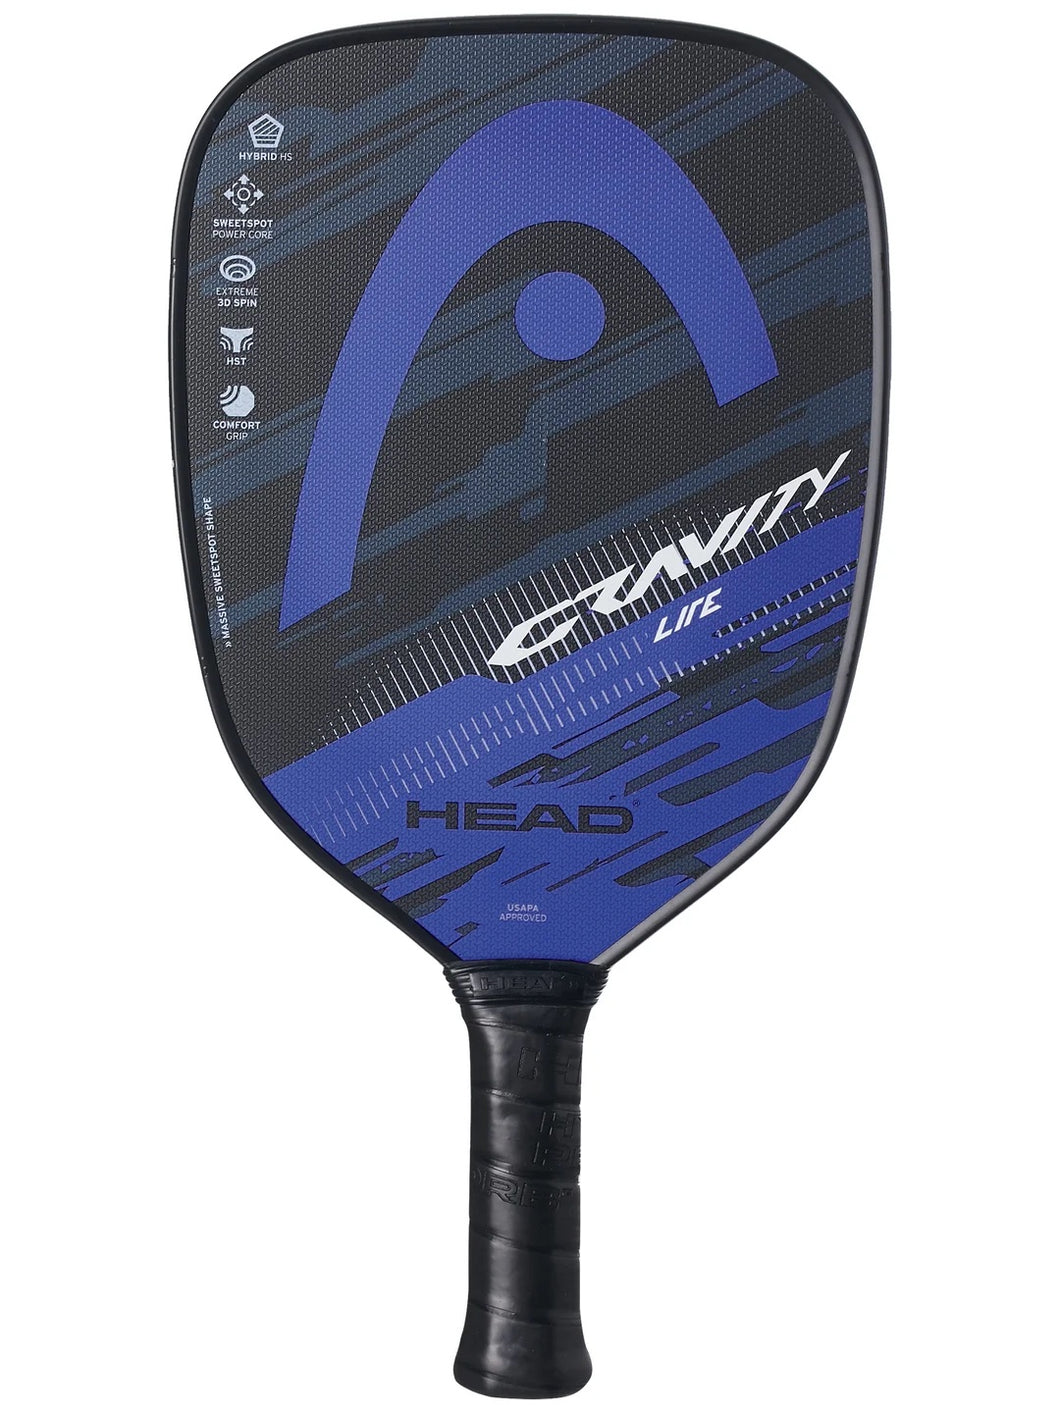 As the lighter-weight version of flagship paddle, this Gravity Tour LITE paddle brings power, control, and feel in a highly maneuverable design. 